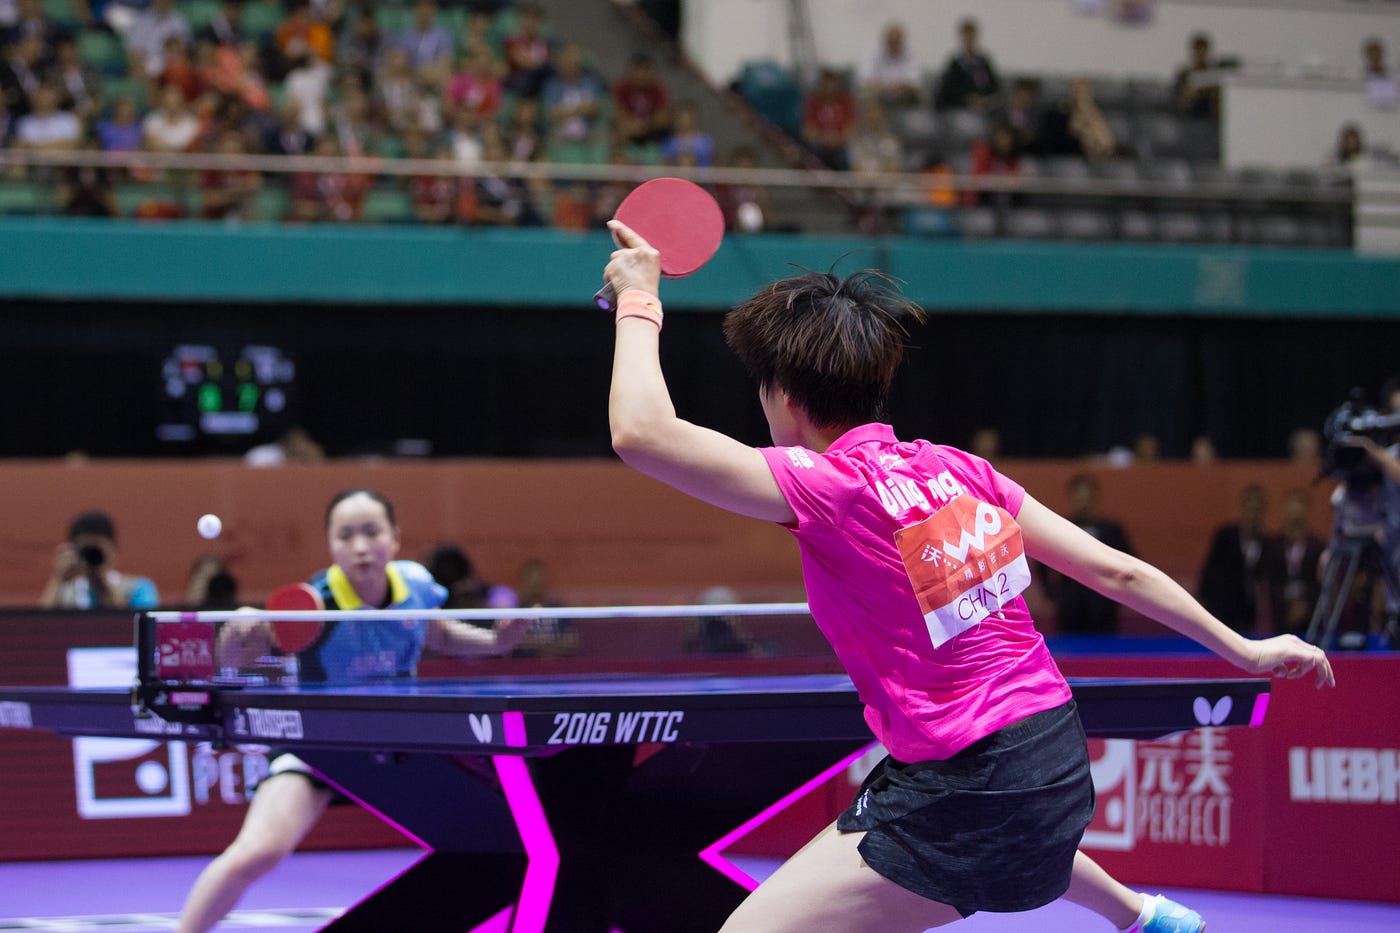 14 Facts About World Table Tennis Day April 23rd 